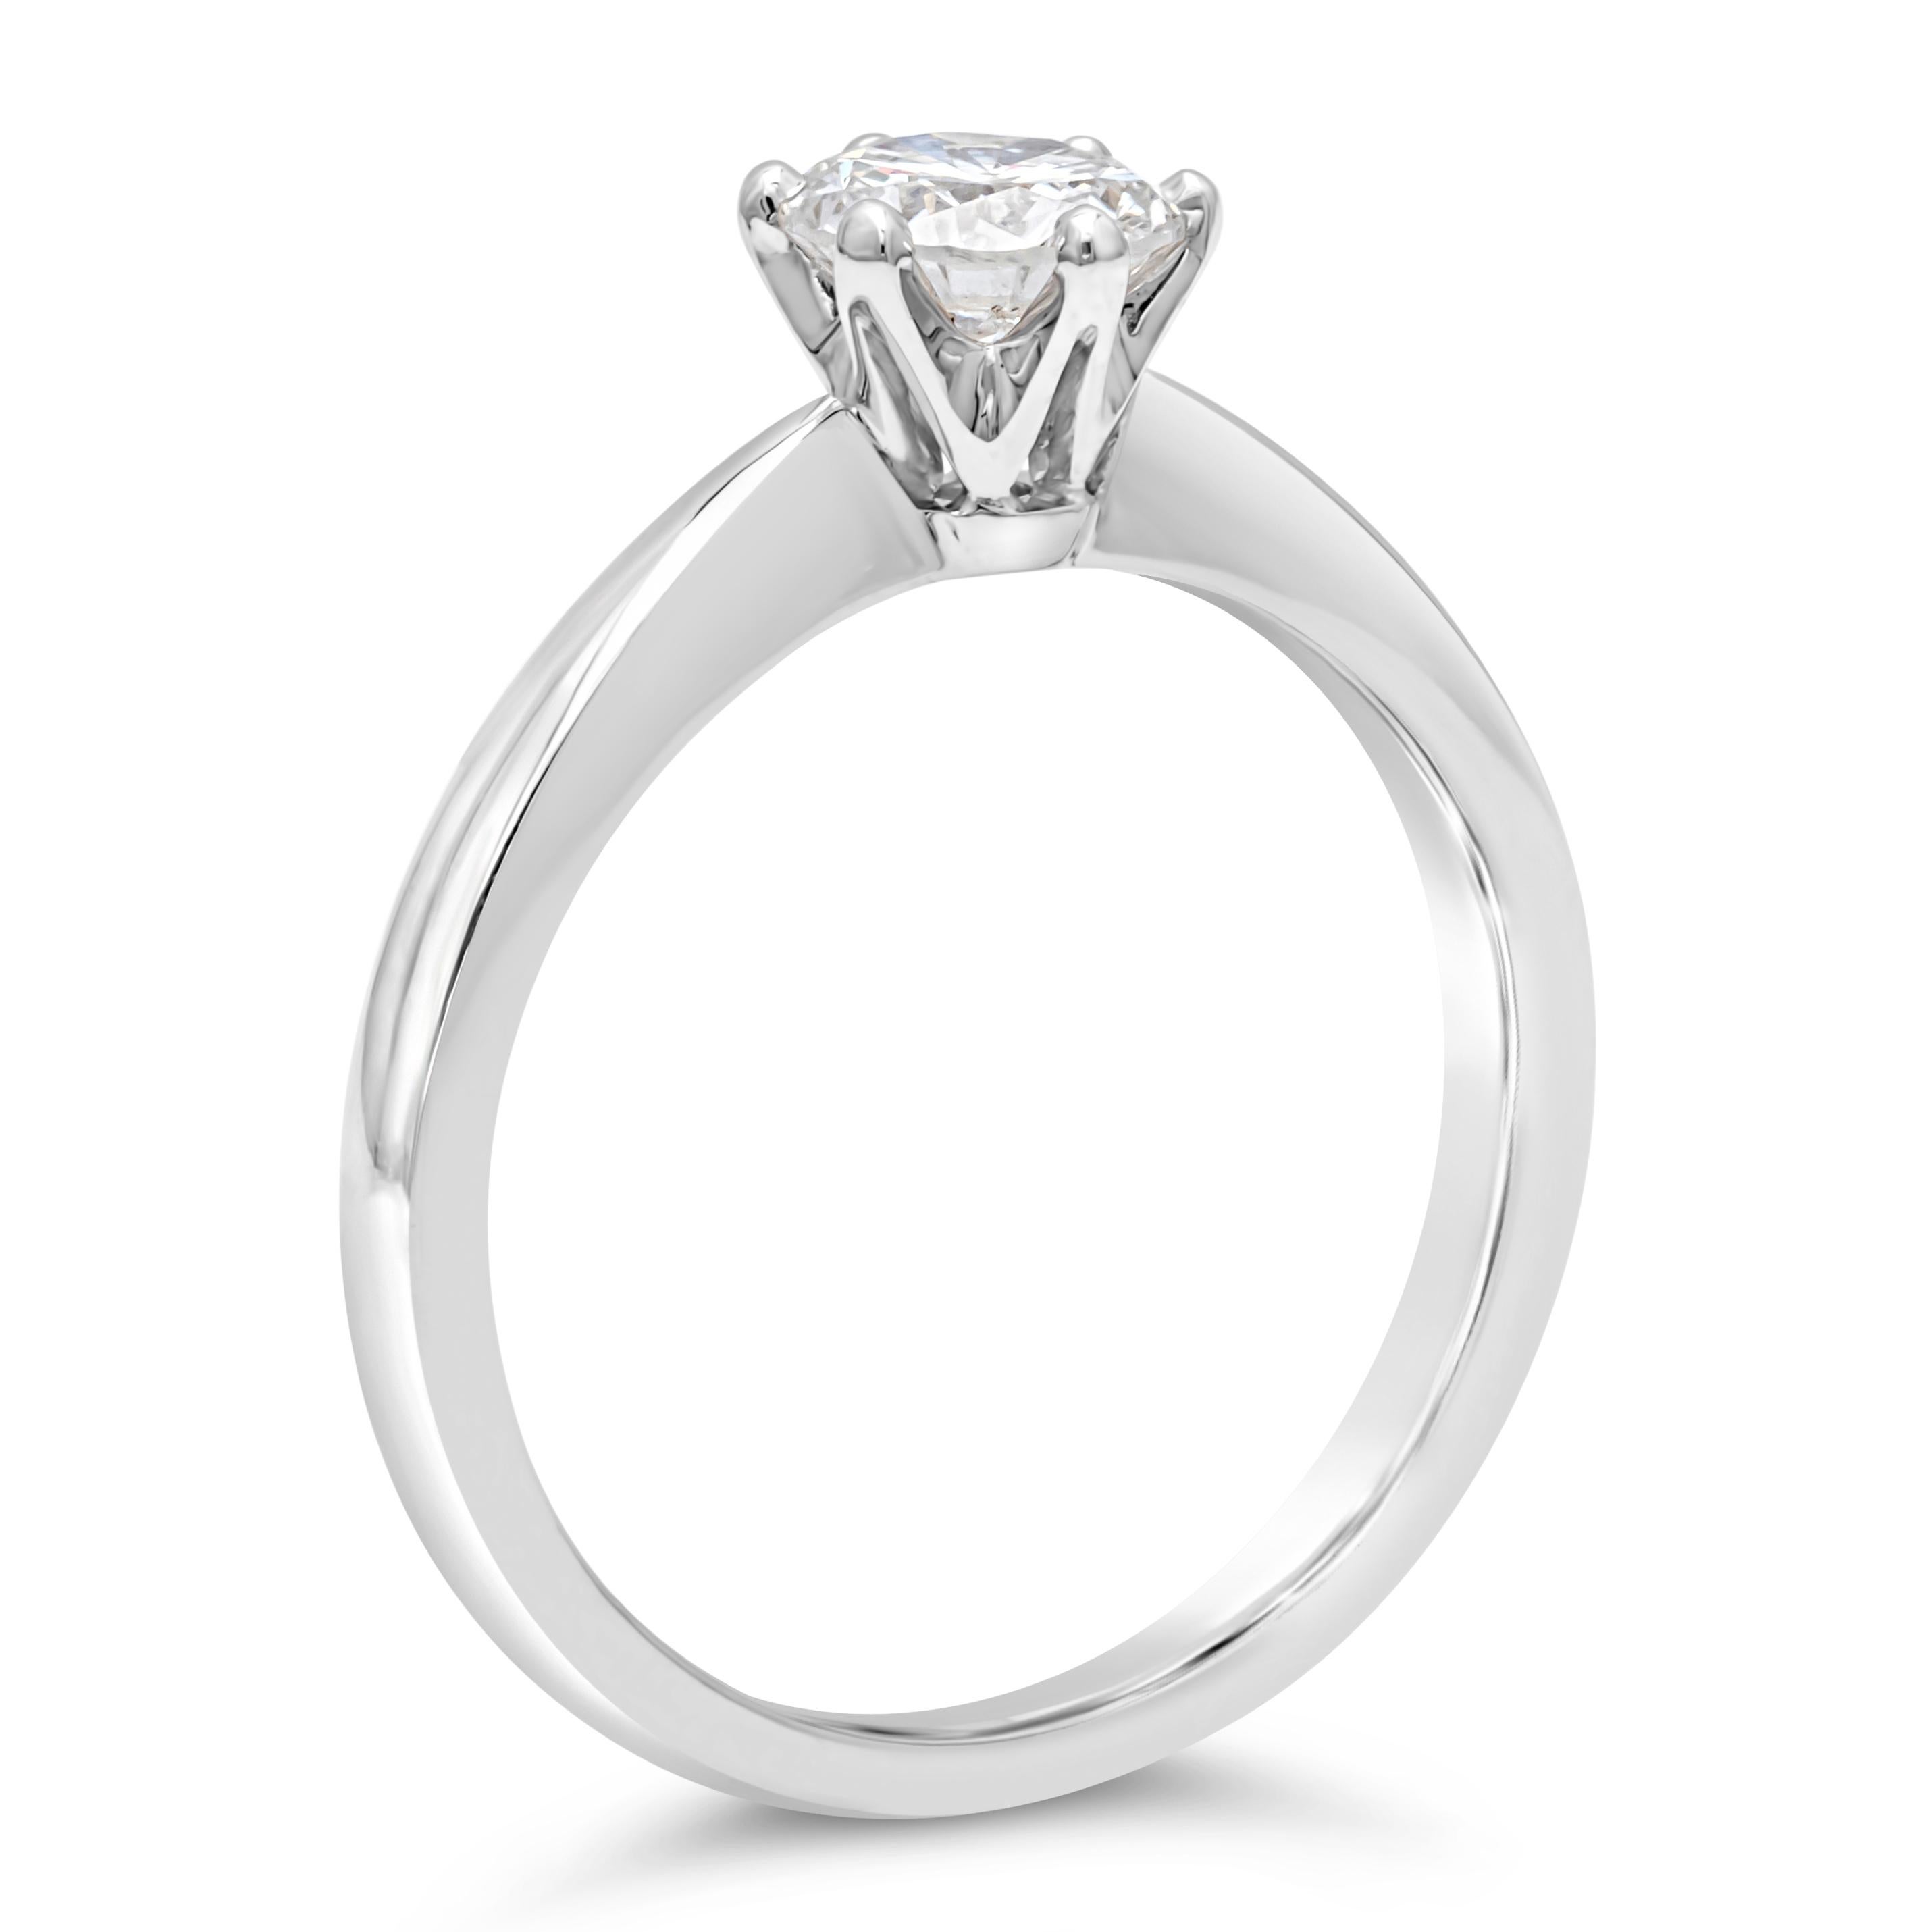 Round Cut Roman Malakov 0.70 Carat Total Brilliant Round Diamond Solitaire Engagement Ring For Sale